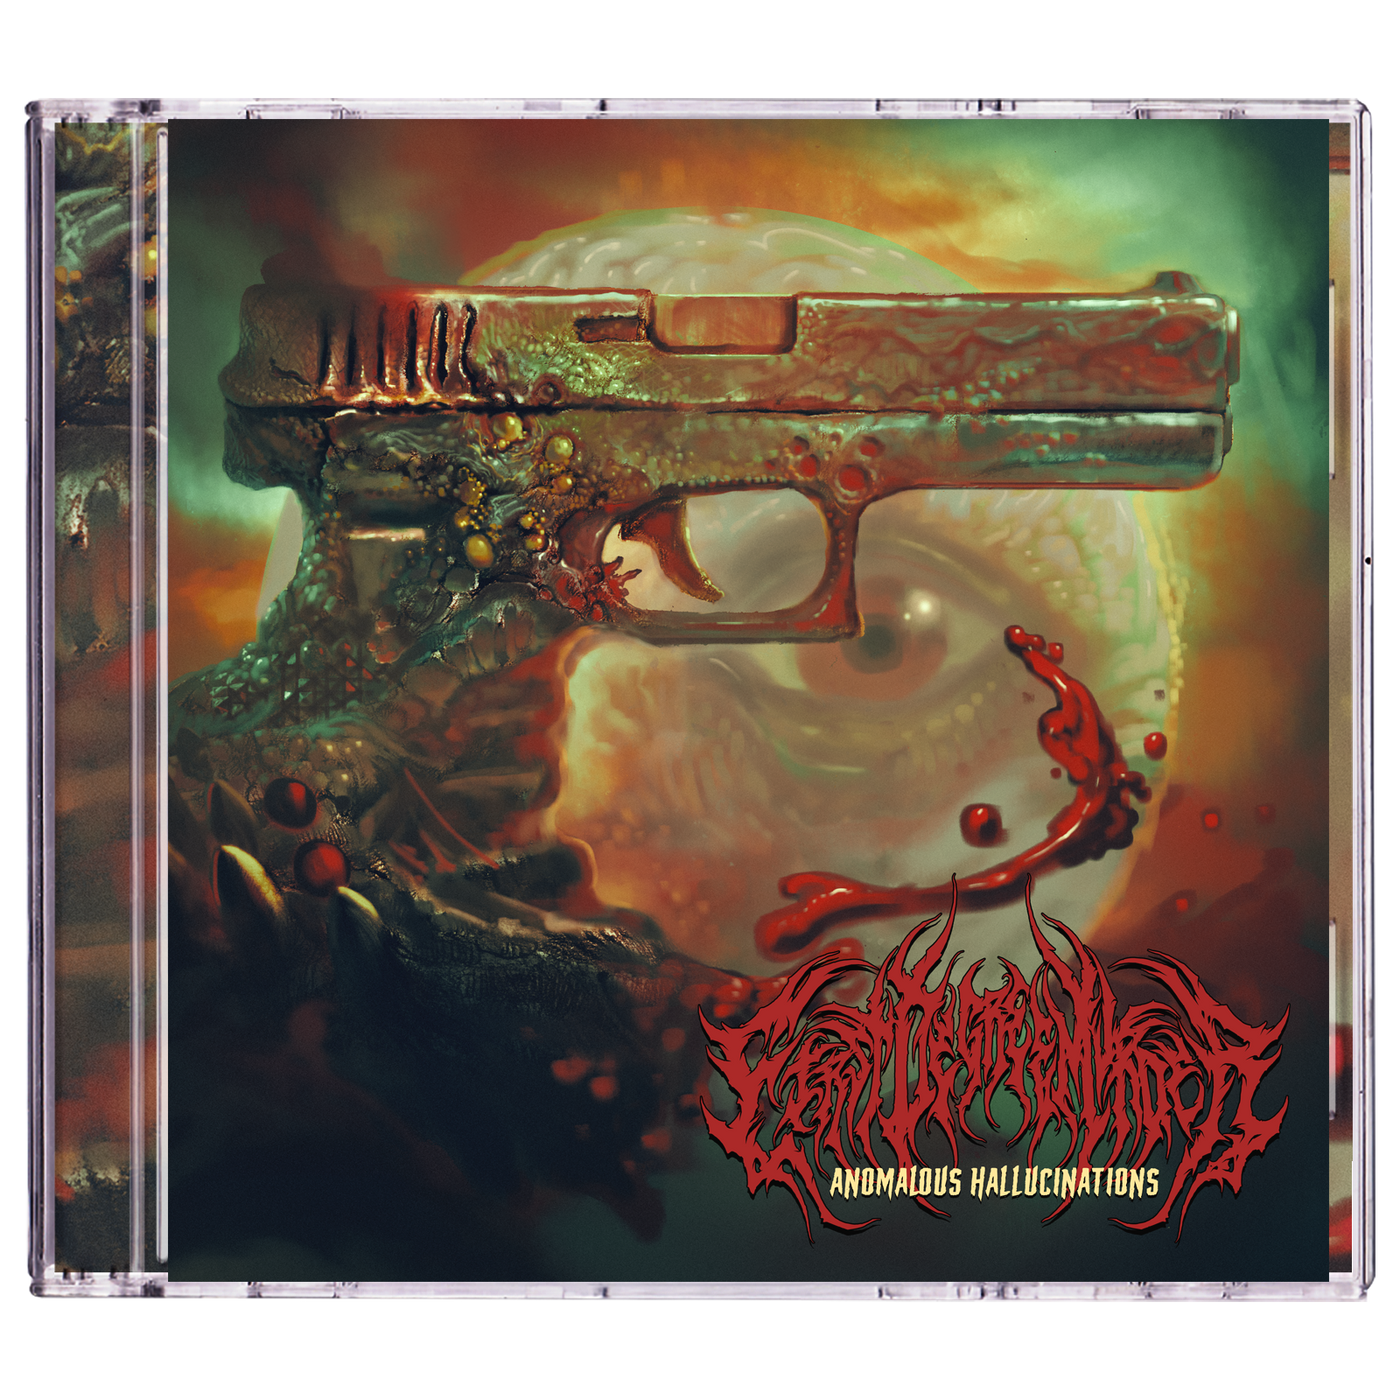 First Degree Murder 'Anomalous Hallucinations' CD